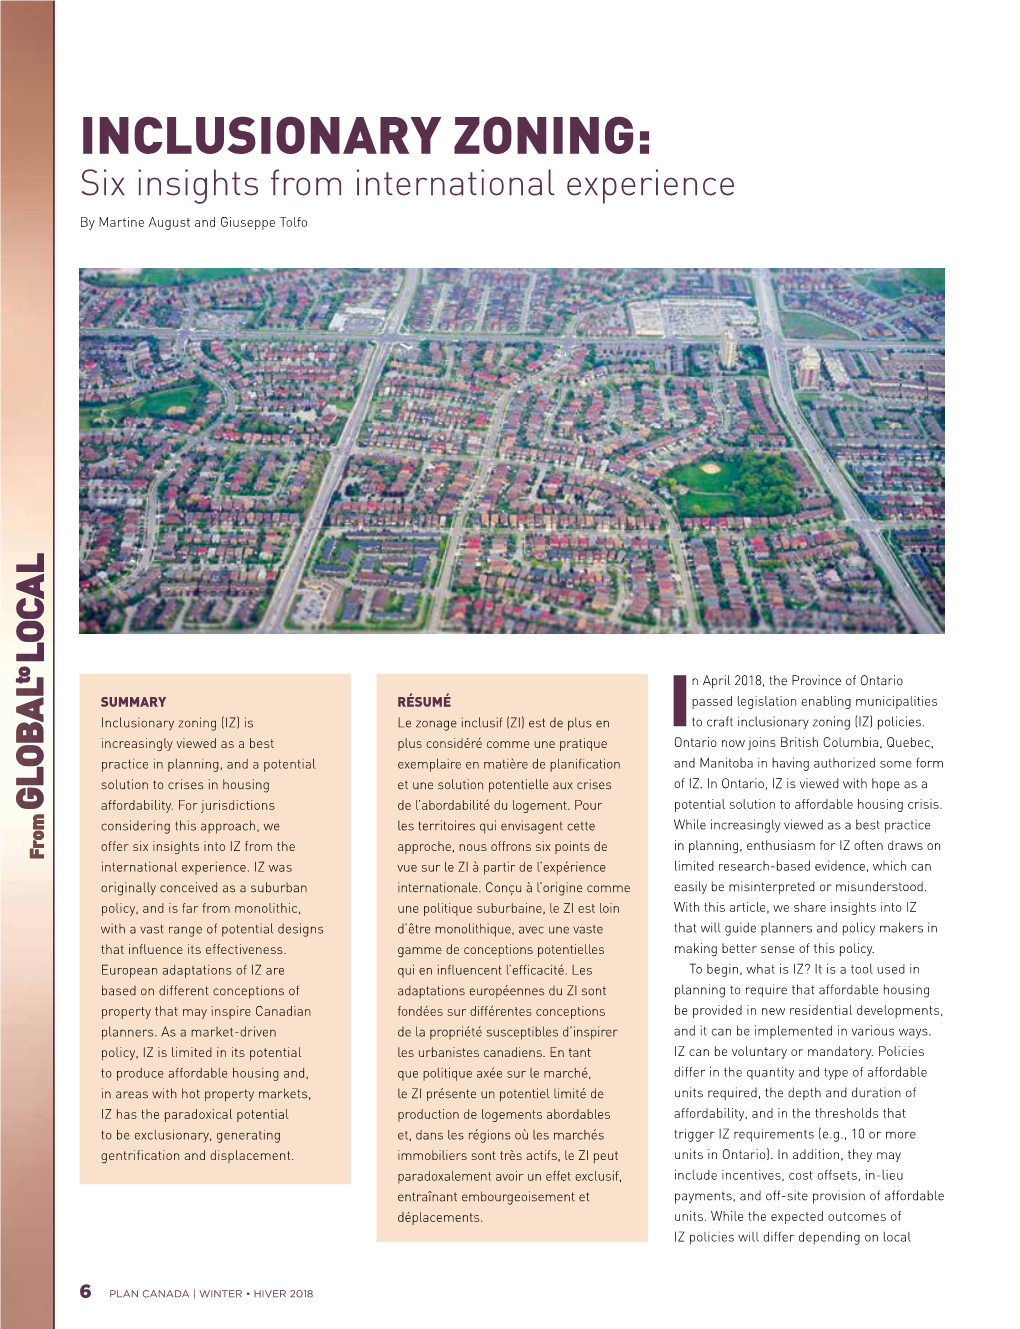 INCLUSIONARY ZONING: Six Insights from International Experience by Martine August and Giuseppe Tolfo